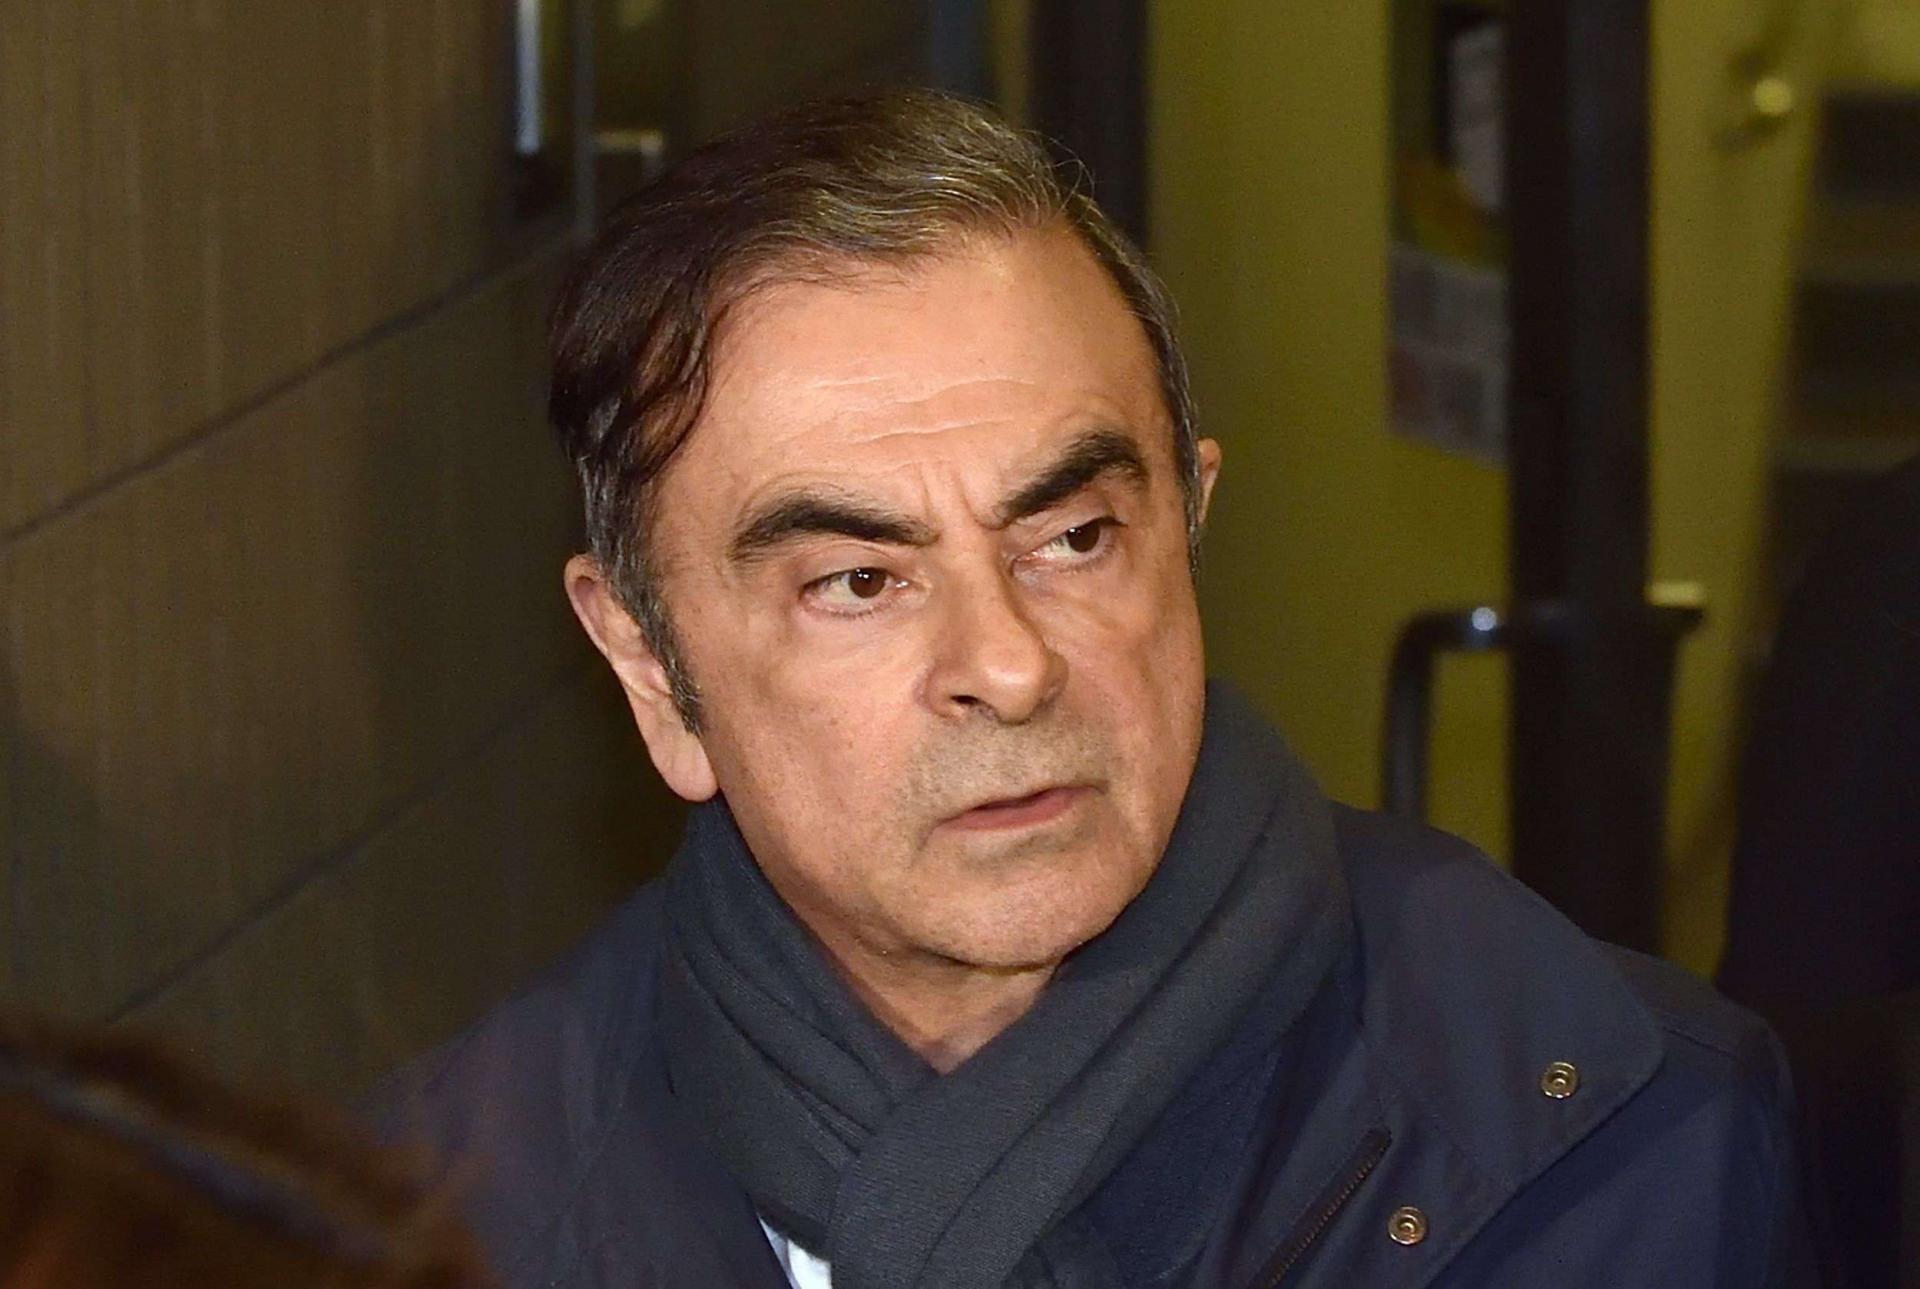 Ghosn said he was "presumed guilty" and had "no choice" but to jump bail